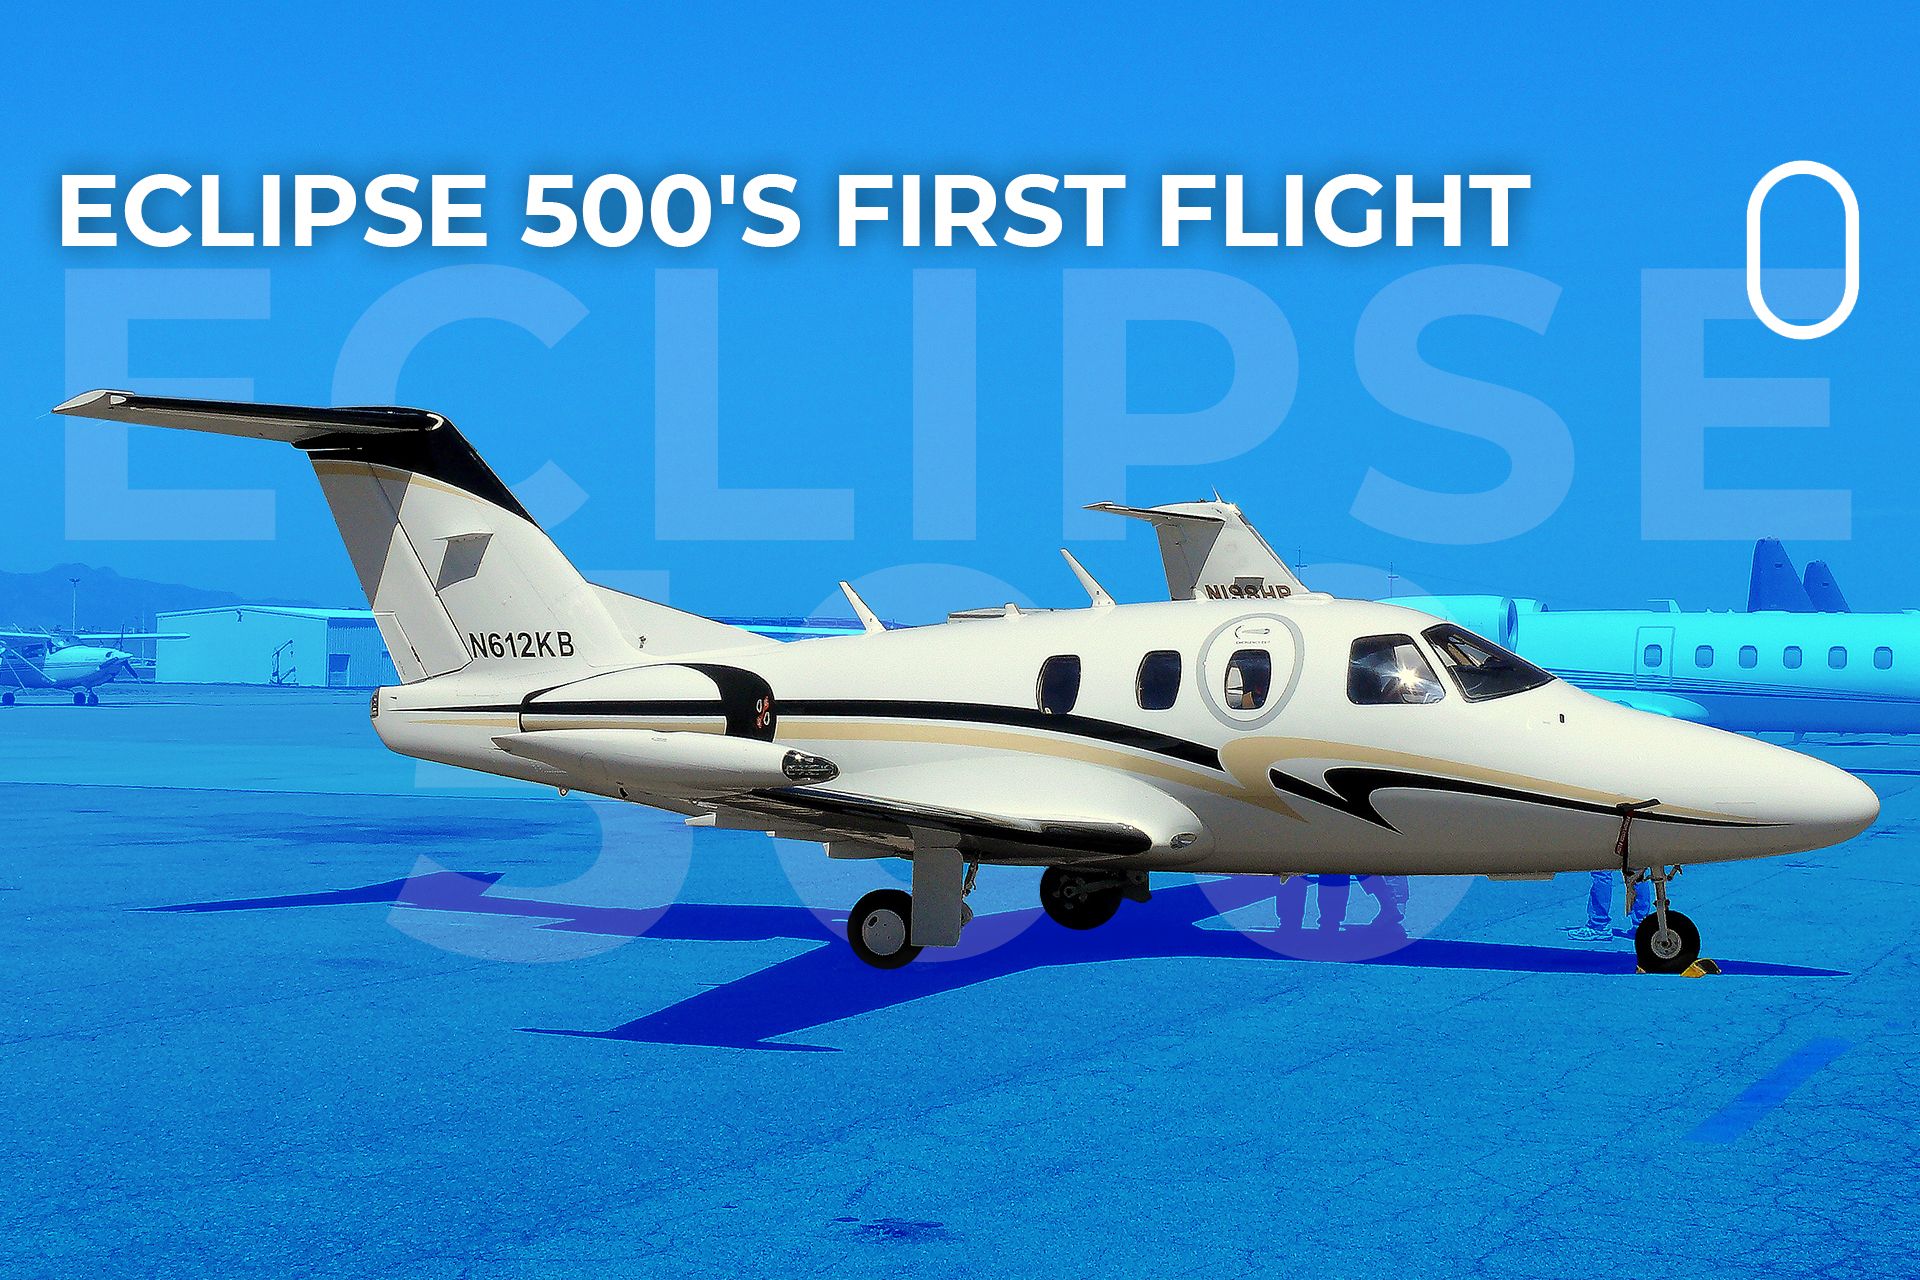 20 Years Ago Today The Eclipse 500's First Flight